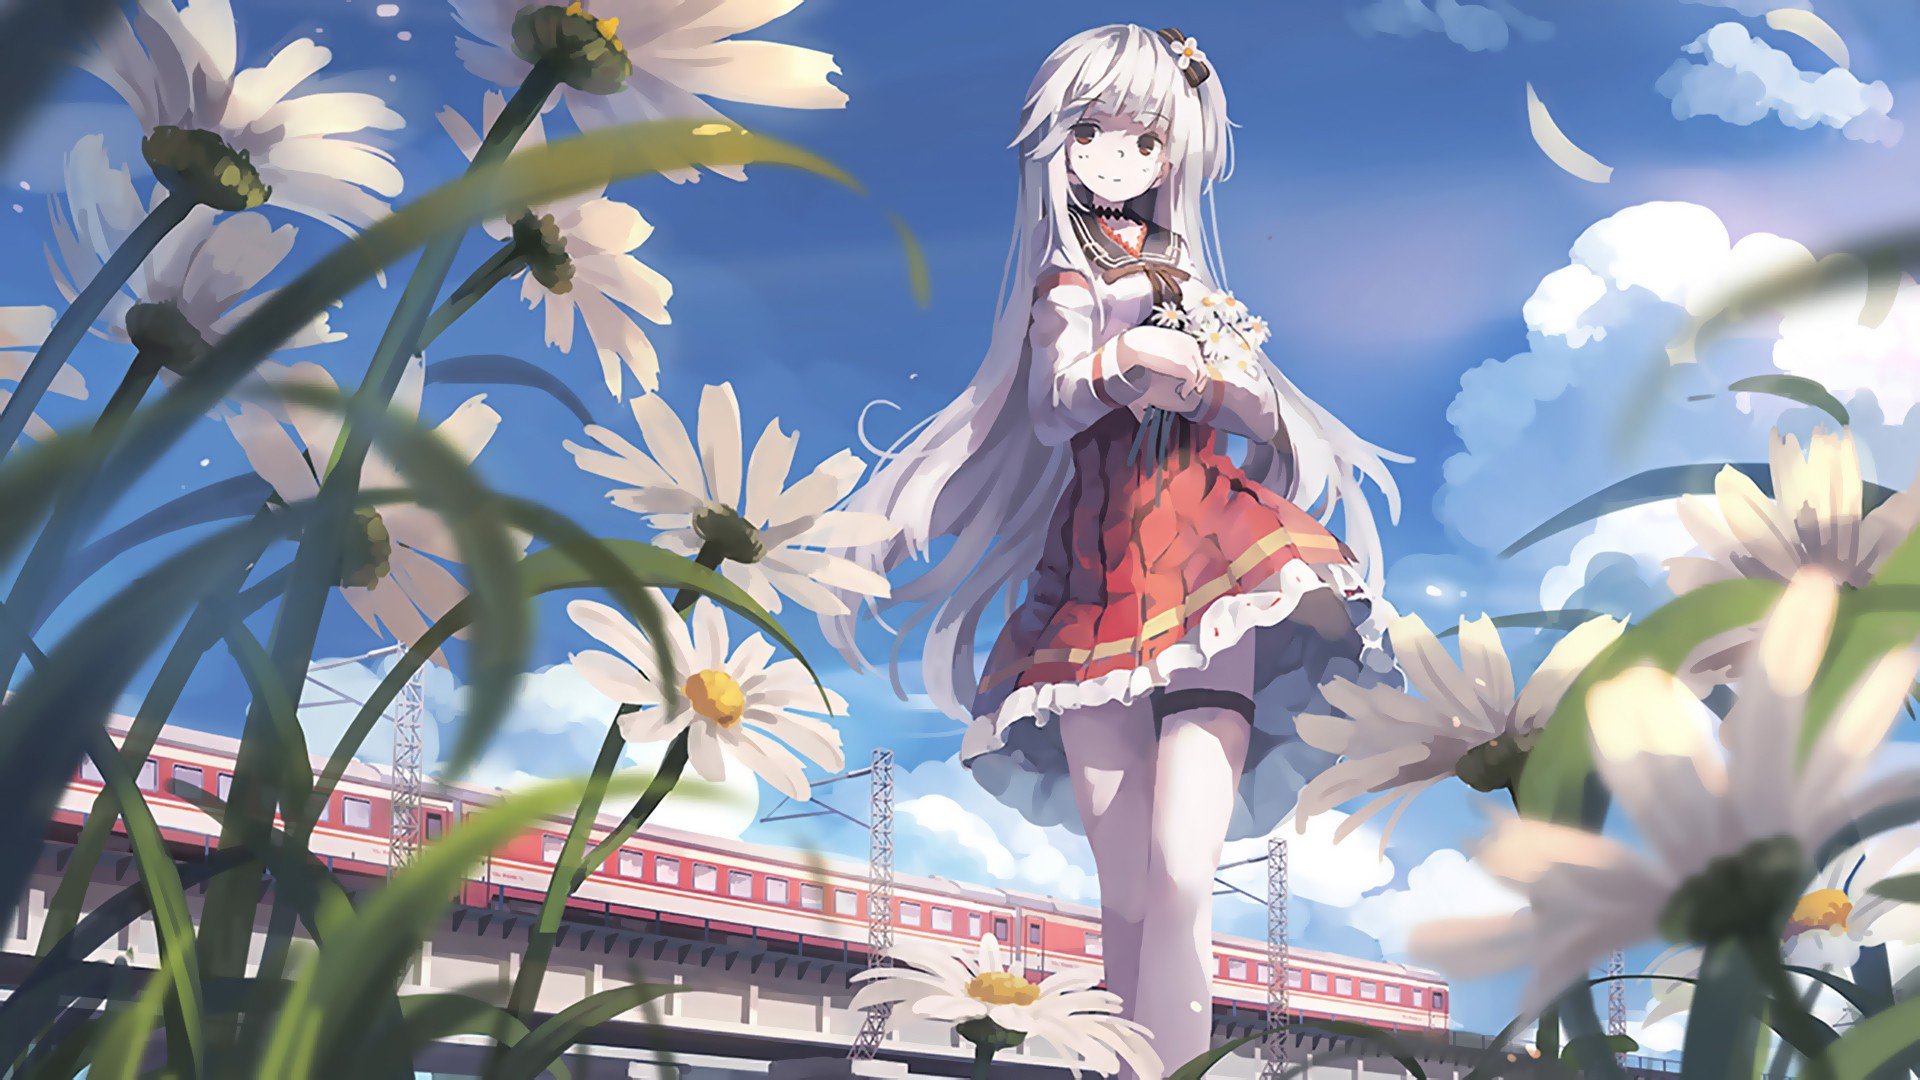 white hair, Long hair, Anime, Landscape, Blossoms, Train, Anime girls, Smiling, Clouds, Clear sky Wallpaper